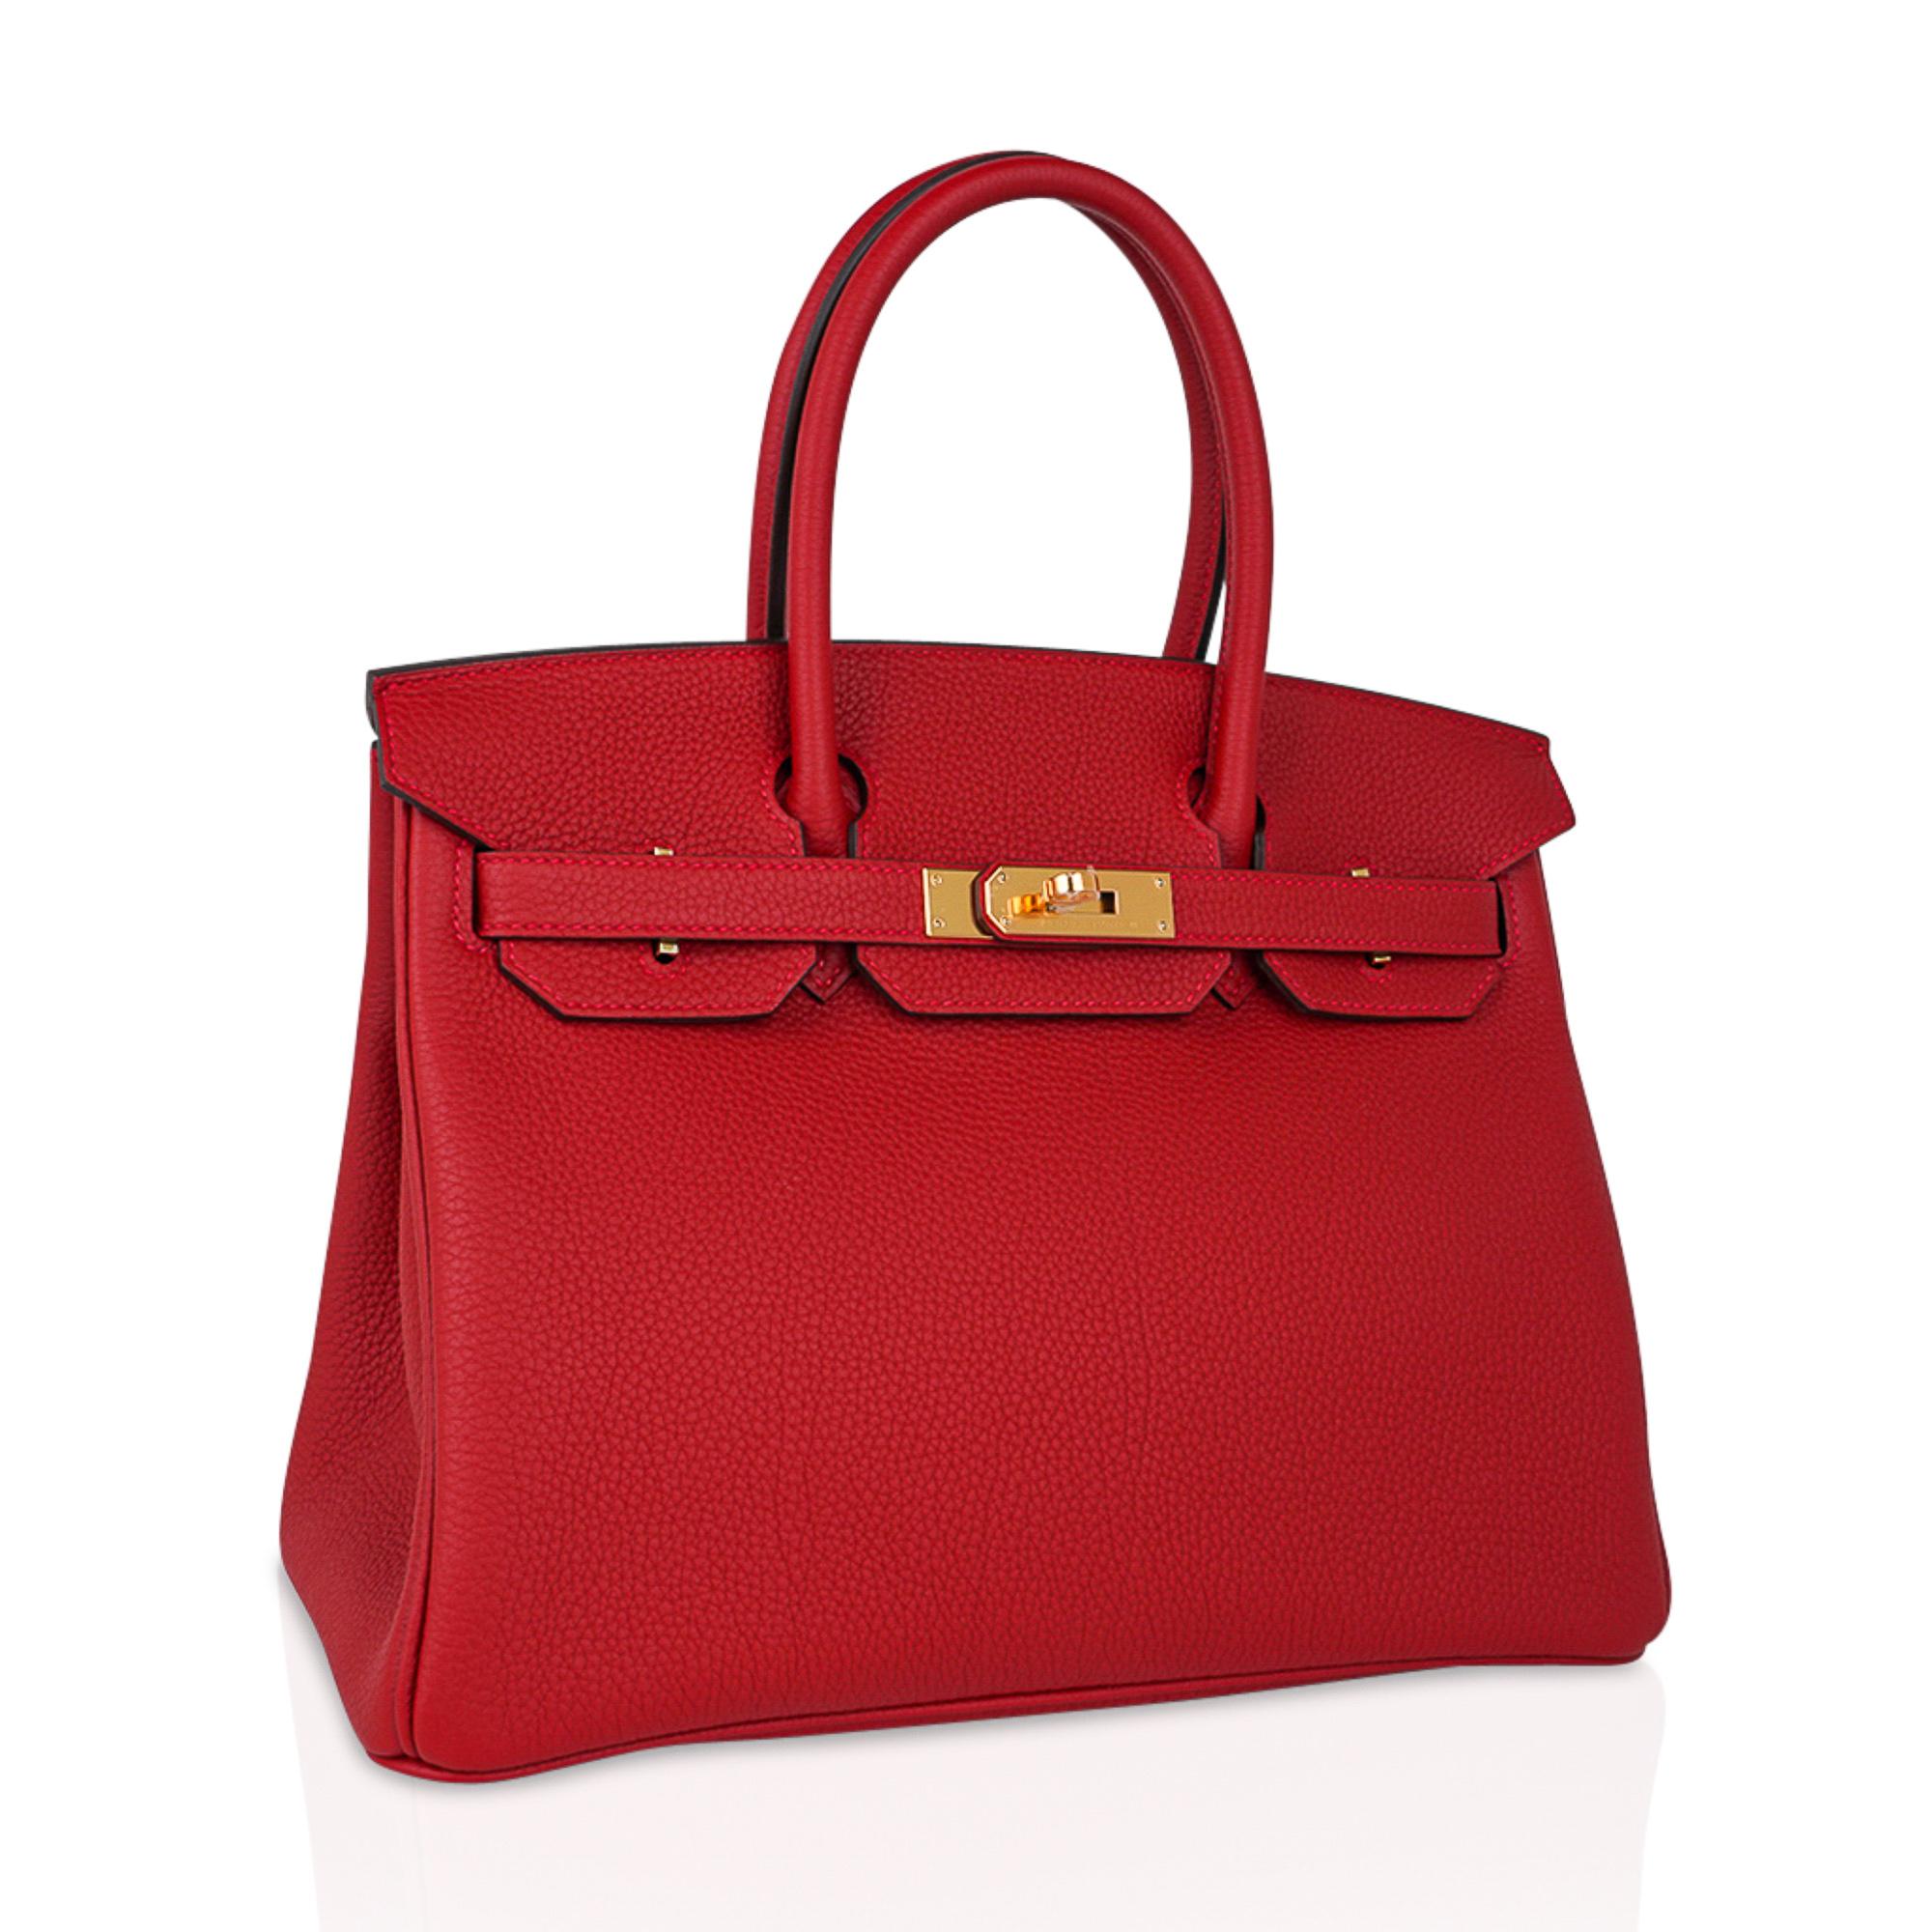 Mightychic offers an Hermes Birkin 30 in rich and exquisite lipstick red Rouge Vif.
Signature pink top stitch.
Coveted gold hardware and togo leather.
Comes with lock and keys and clochette, sleepers and signature orange Hermes box.
NEW or NEVER